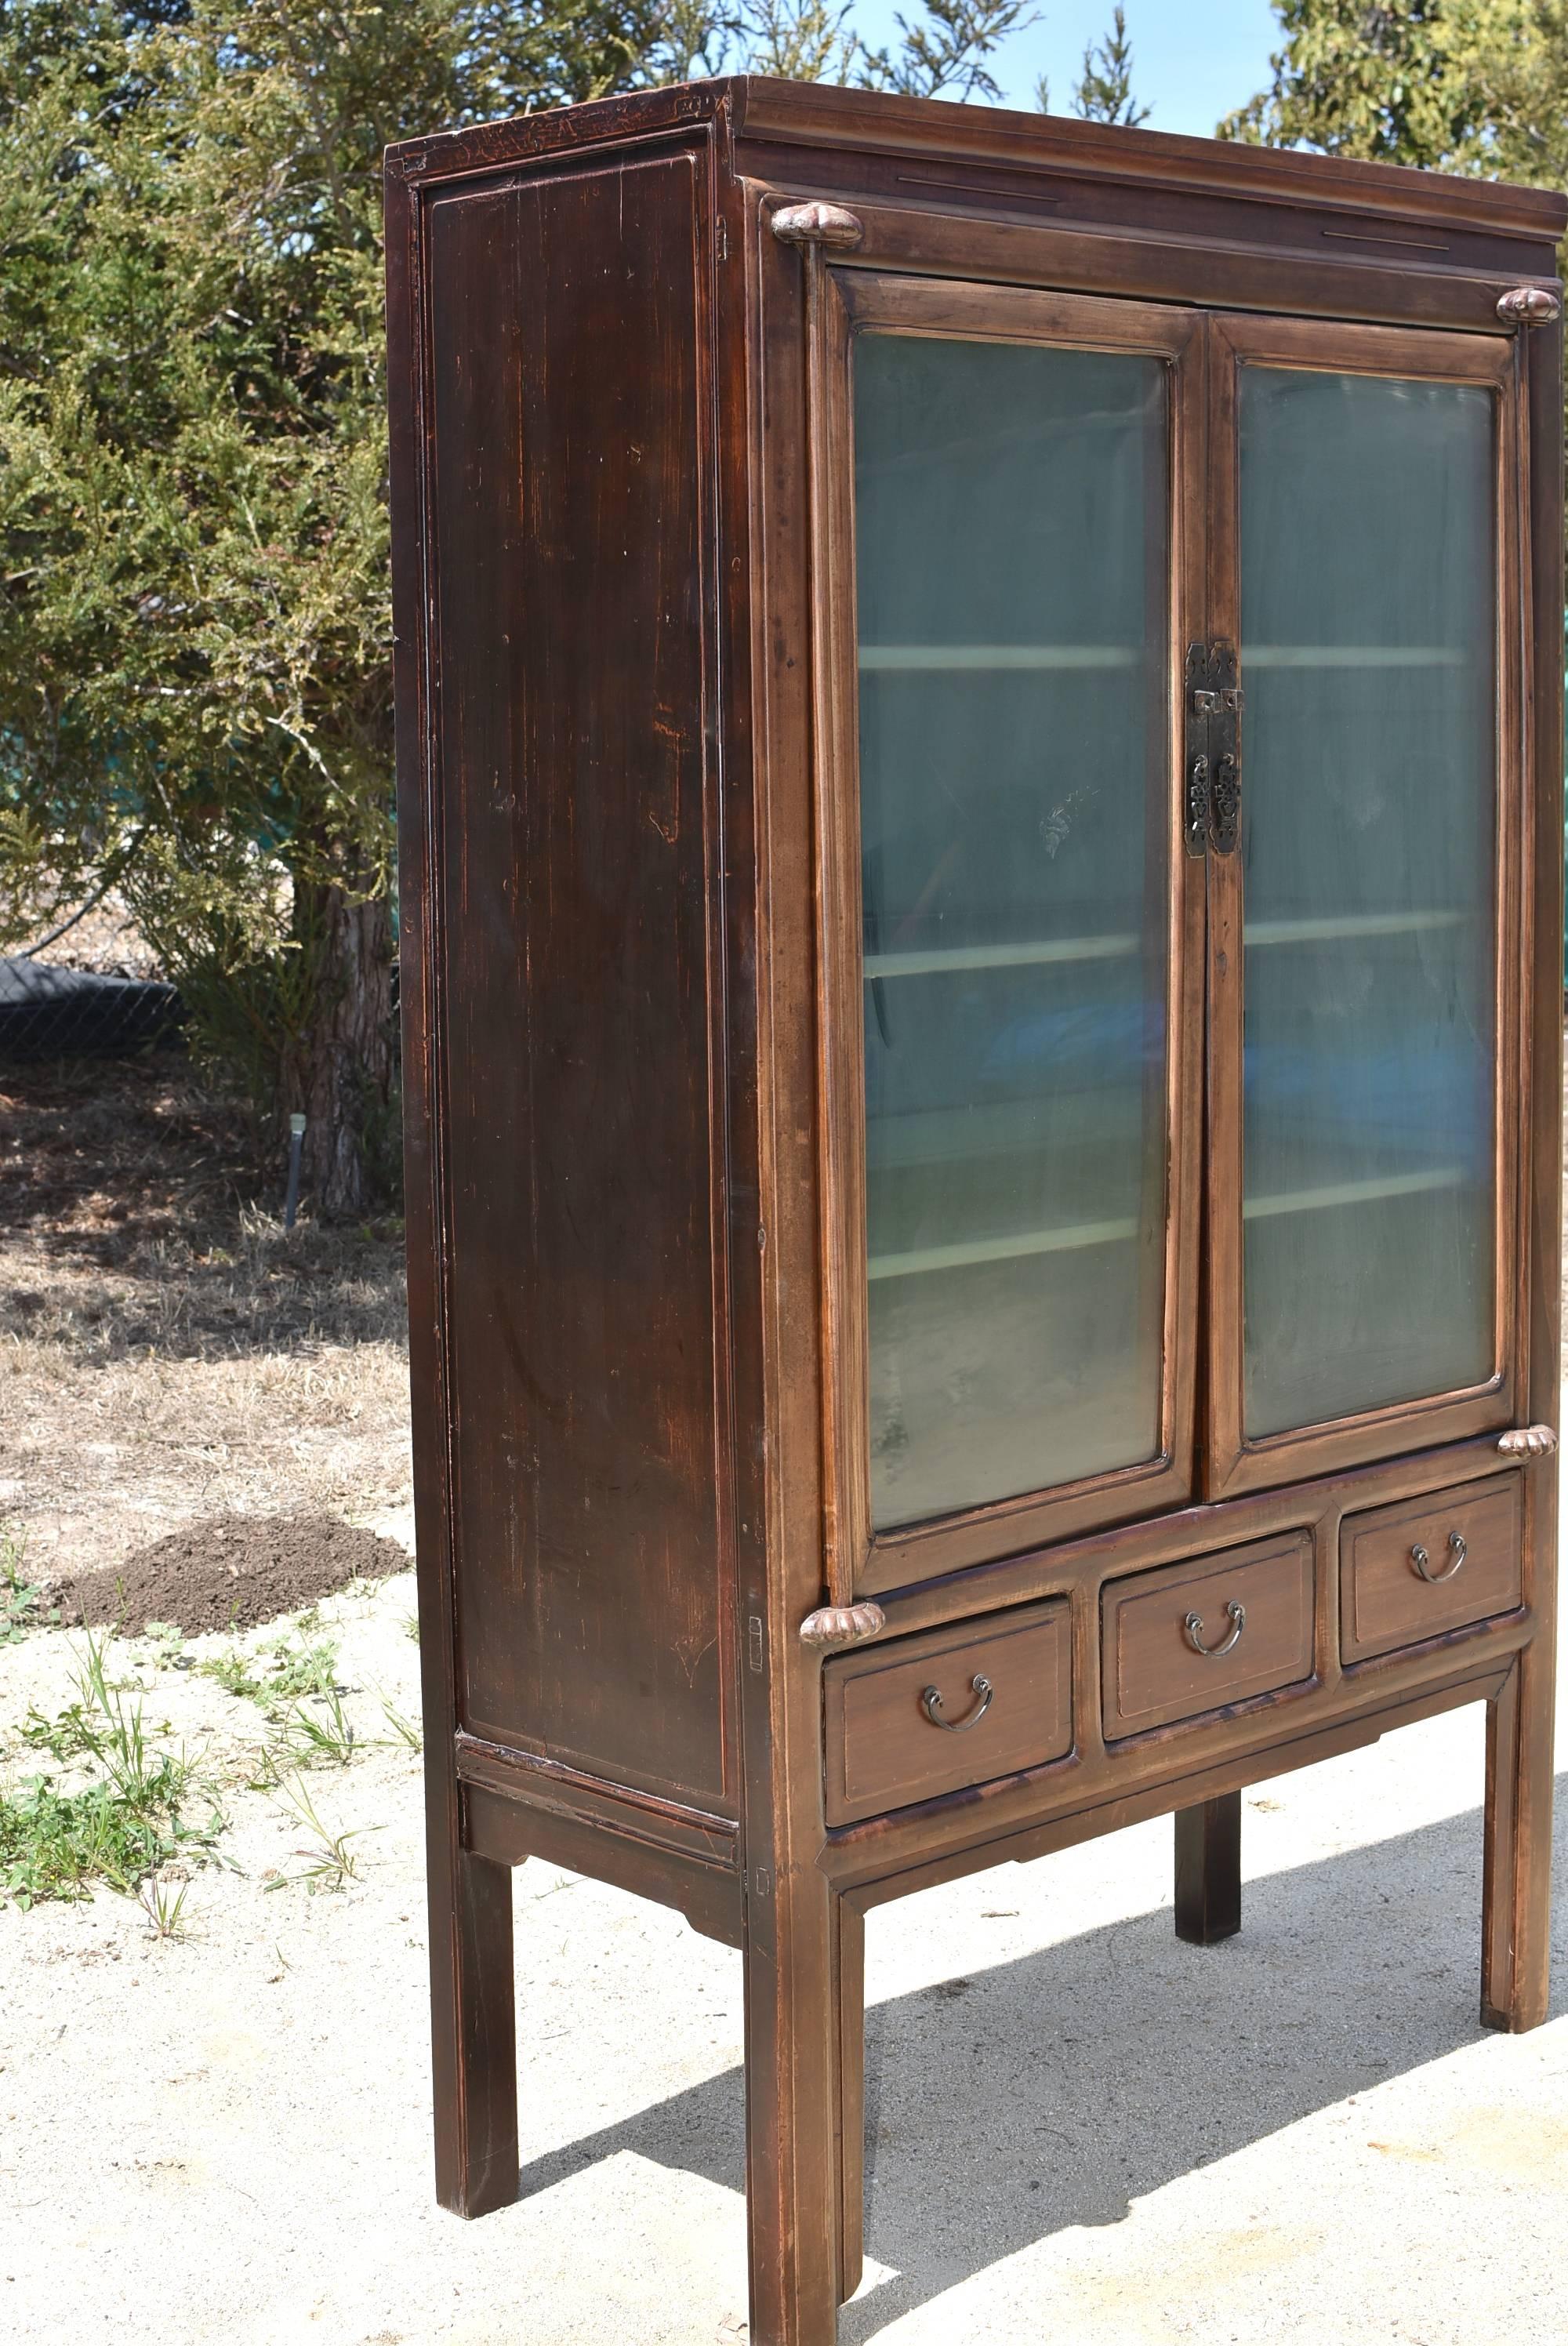 A Ming style solid wood cabinet with glass doors and removable shelves. Three full length drawers provide additional storage. Carved thin lines on the top reflect Ming influence. Beautiful hardware is of a flower basket pattern. Half lotus knobs